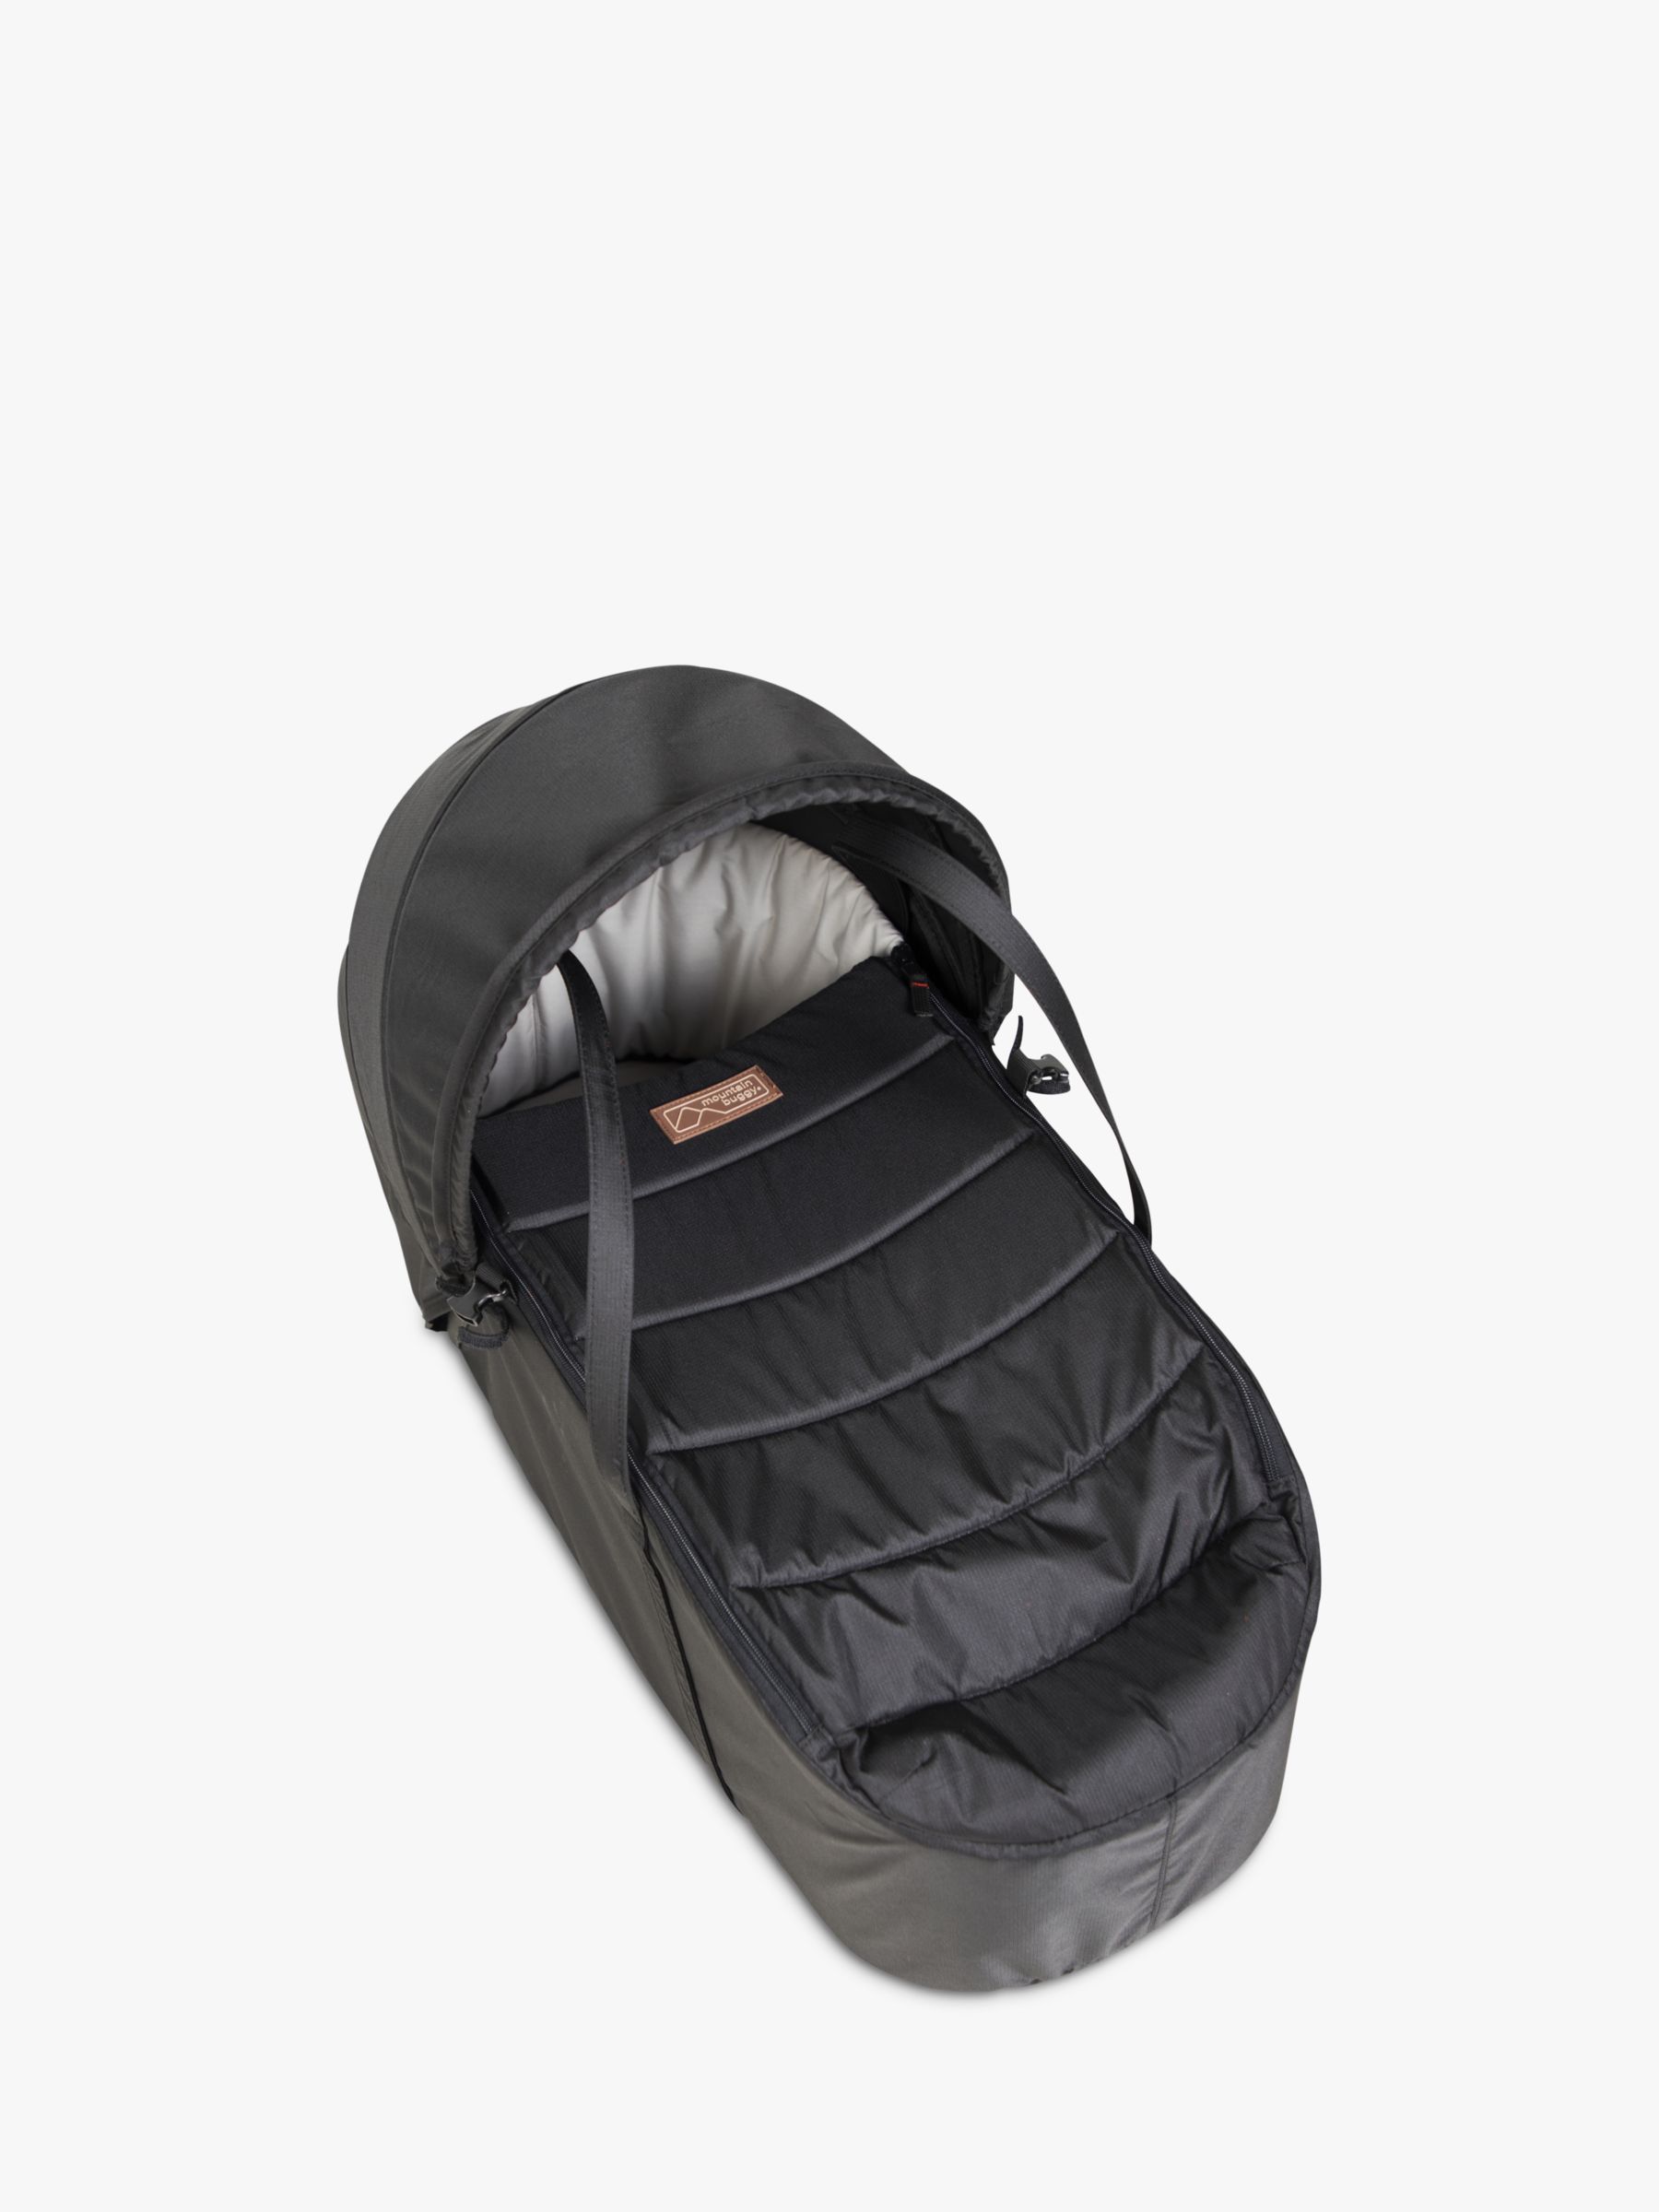 Image of Mountain Buggy Baby Cocoon V2 Black